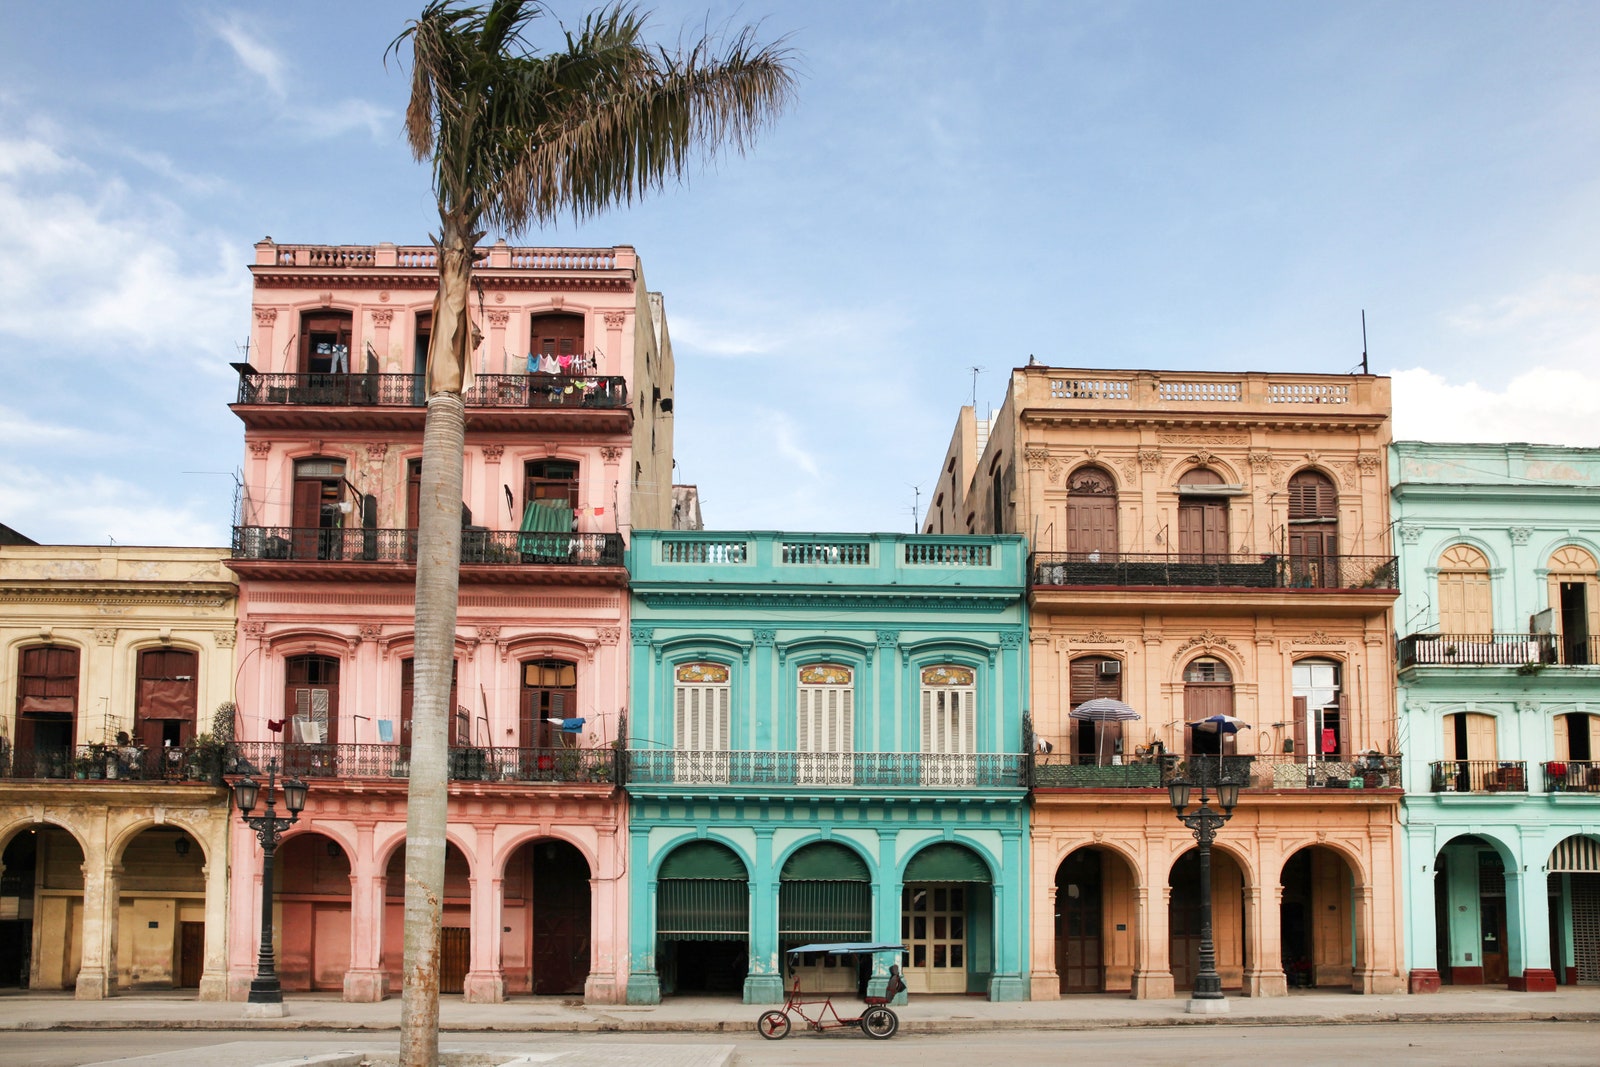 Can You Pass This Geography Quiz Where Every Question Comes With a 🐶 Dog-Related Clue? Cuba